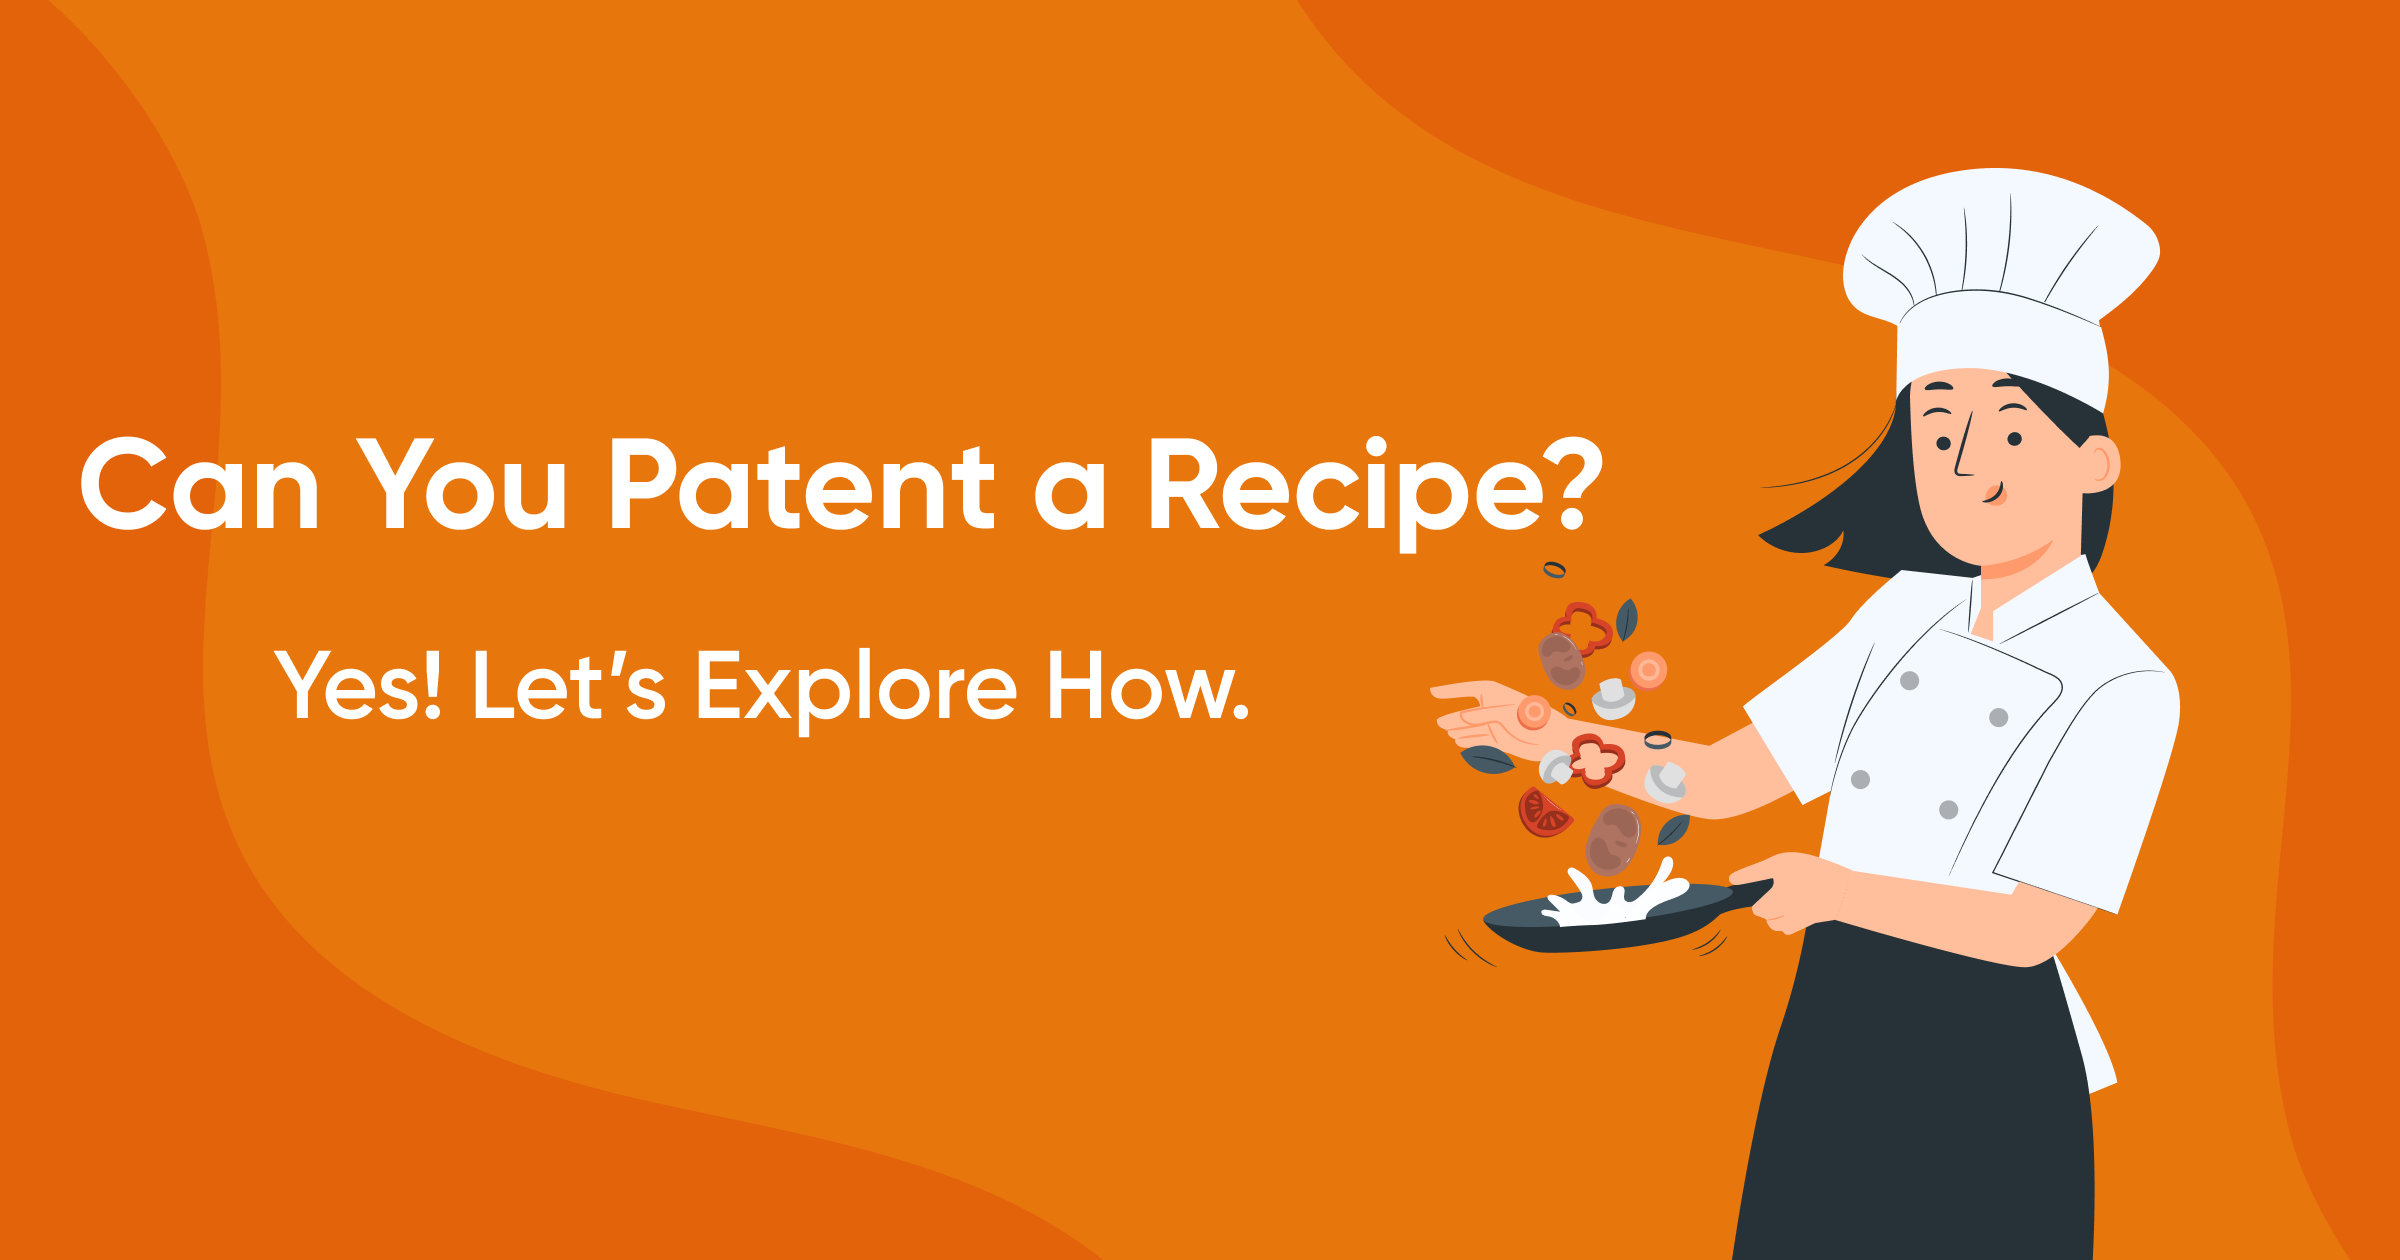  Can You Patent a Recipe? Yes! Let’s Explore How. 